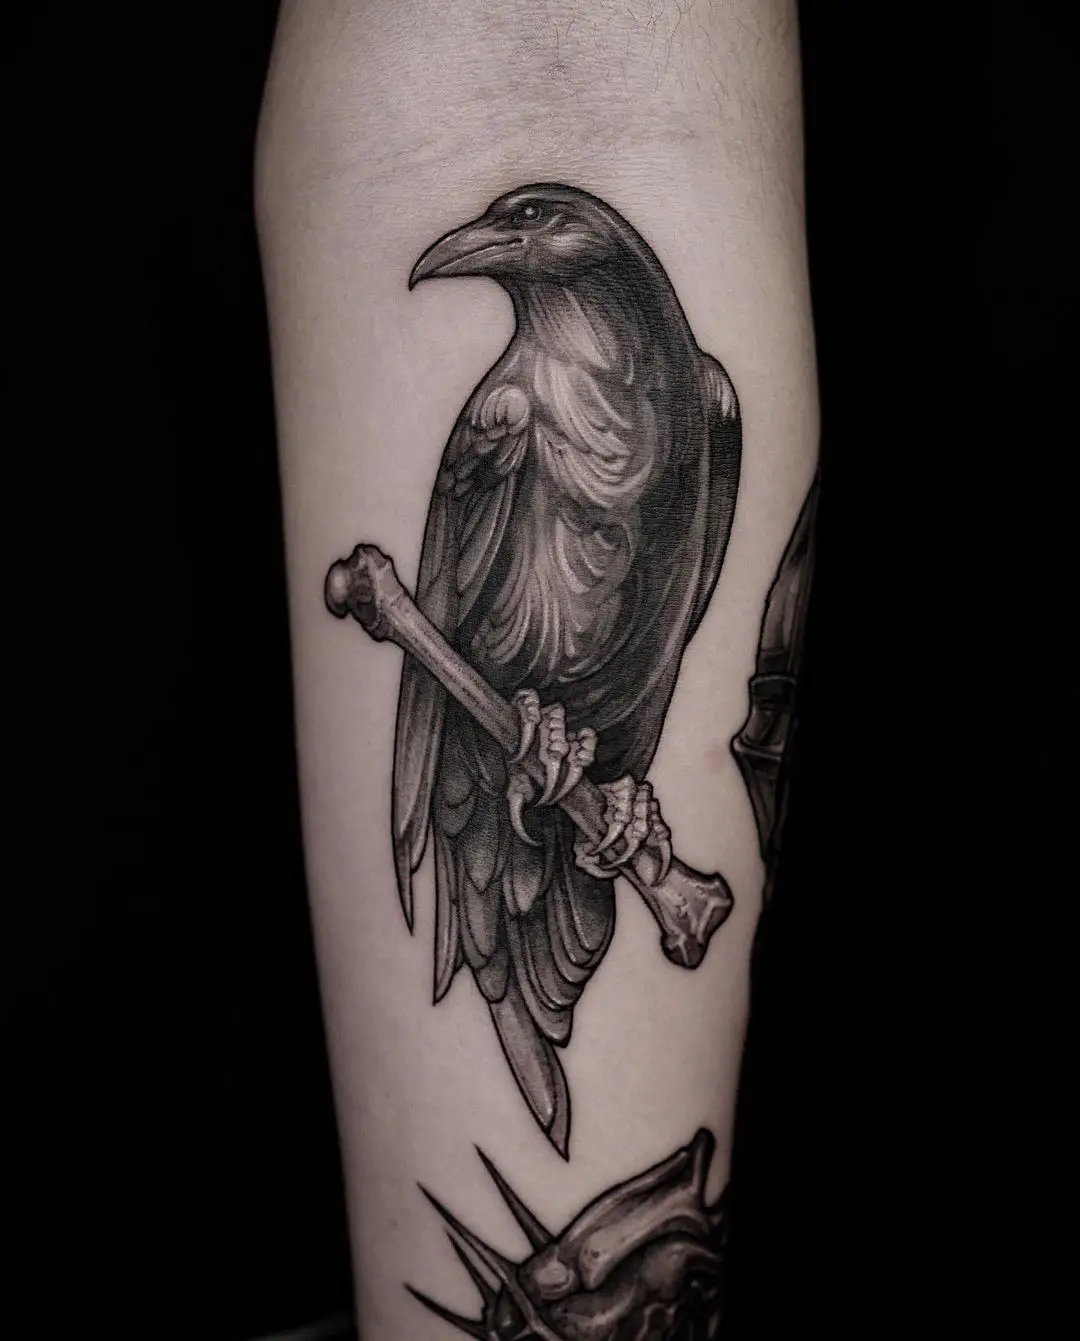 From Realistic To Abstract: Crow Tattoo Ideas For Every Style